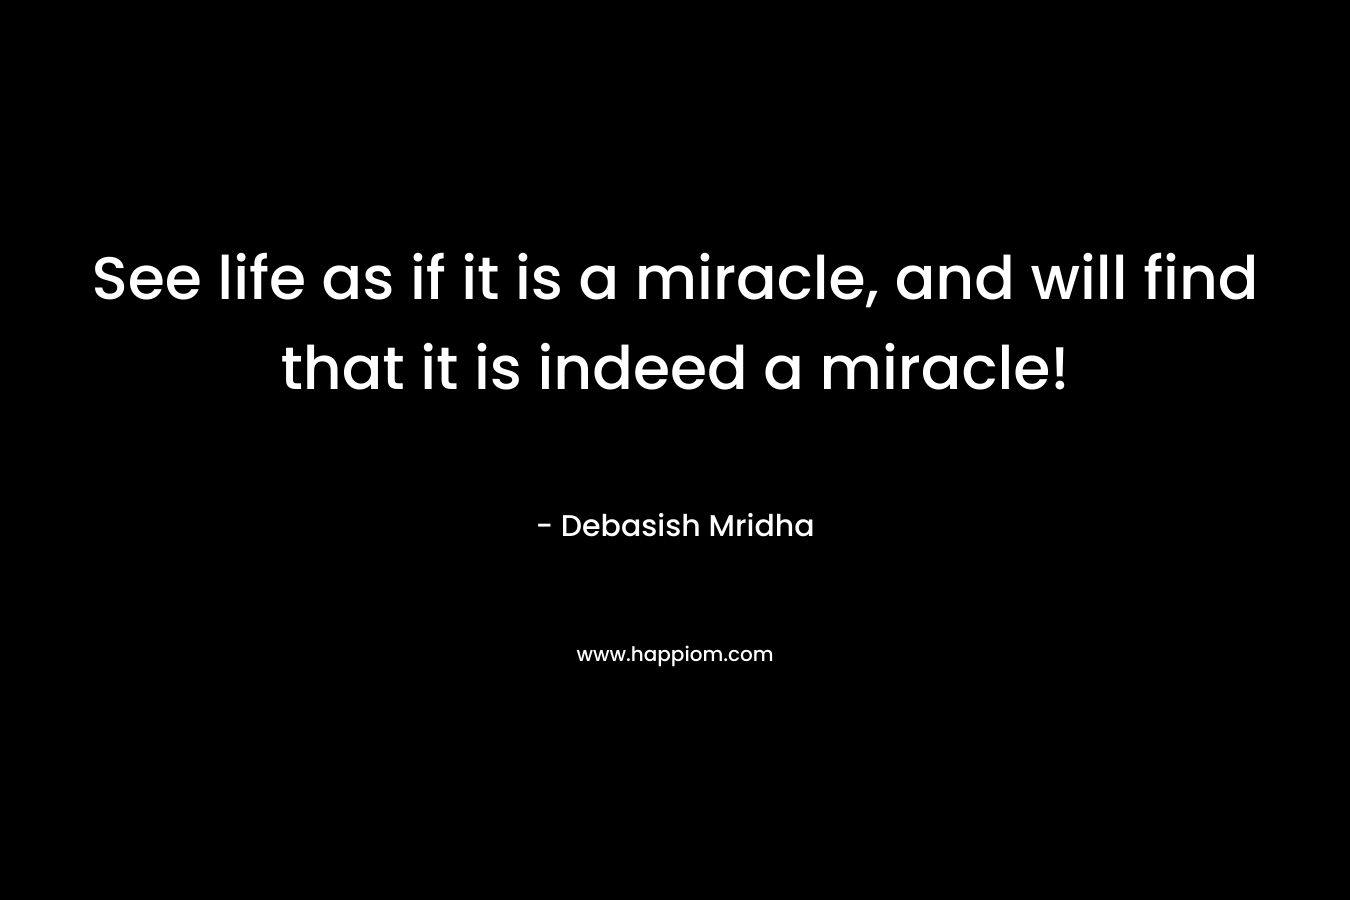 See life as if it is a miracle, and will find that it is indeed a miracle!